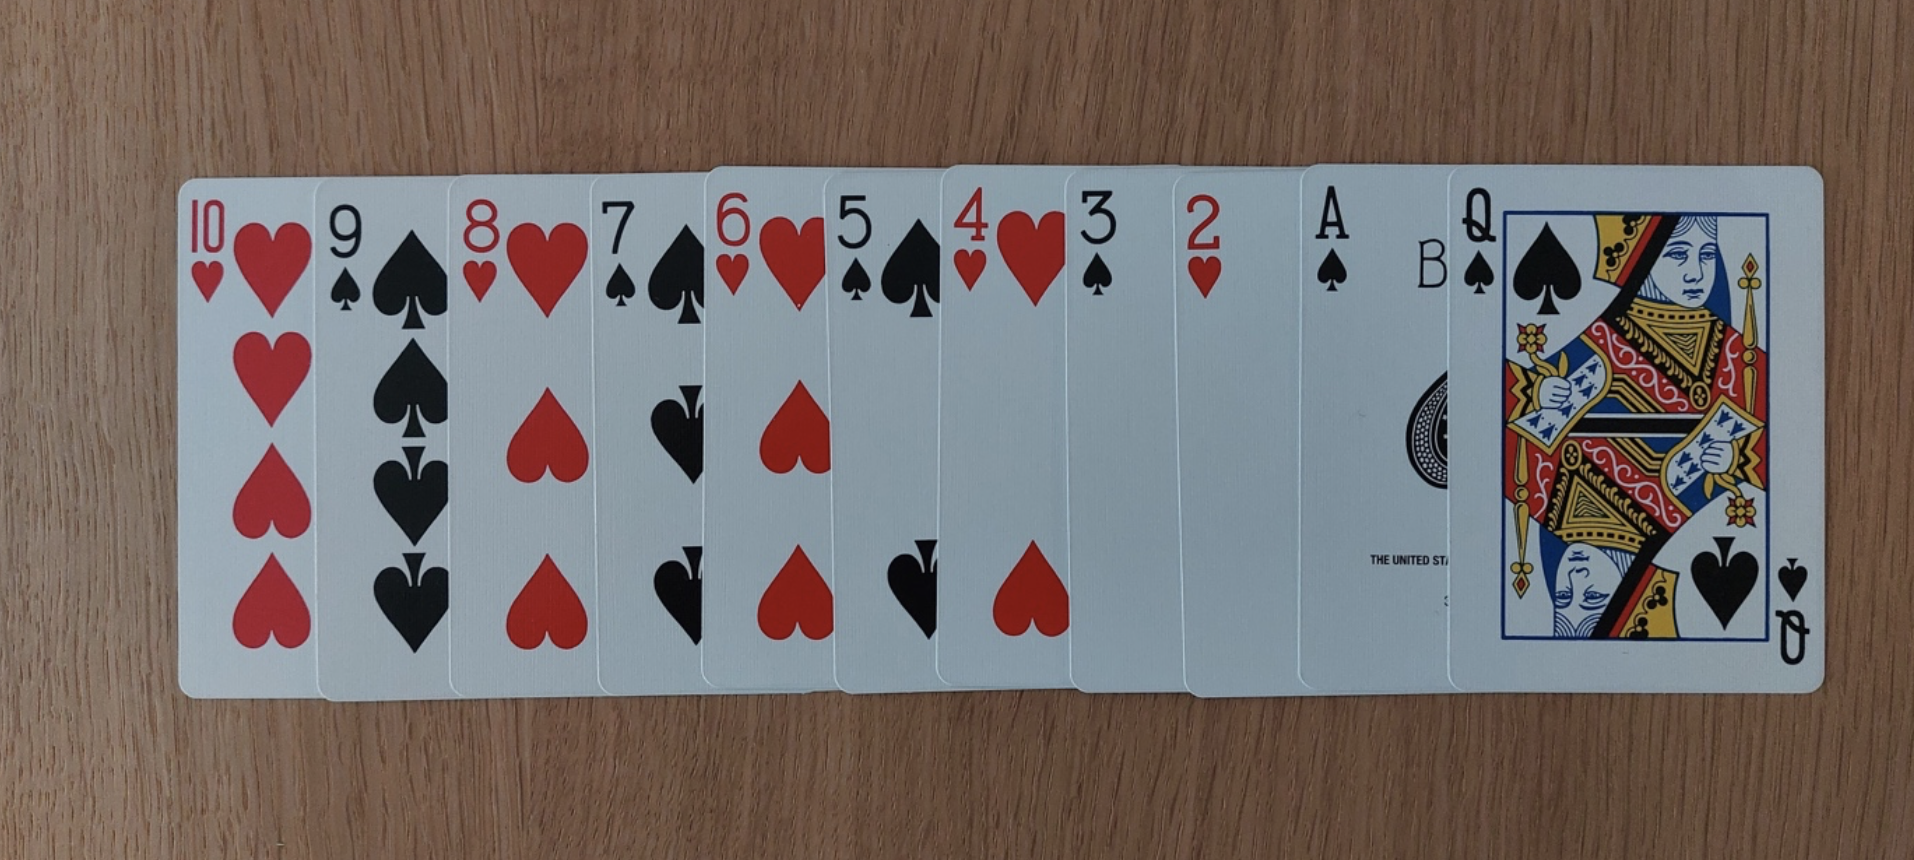 Playing cards: 10H, 9S, 8H, 7S, 6H, 5S, 4H, 3S, 2H, AS, QH